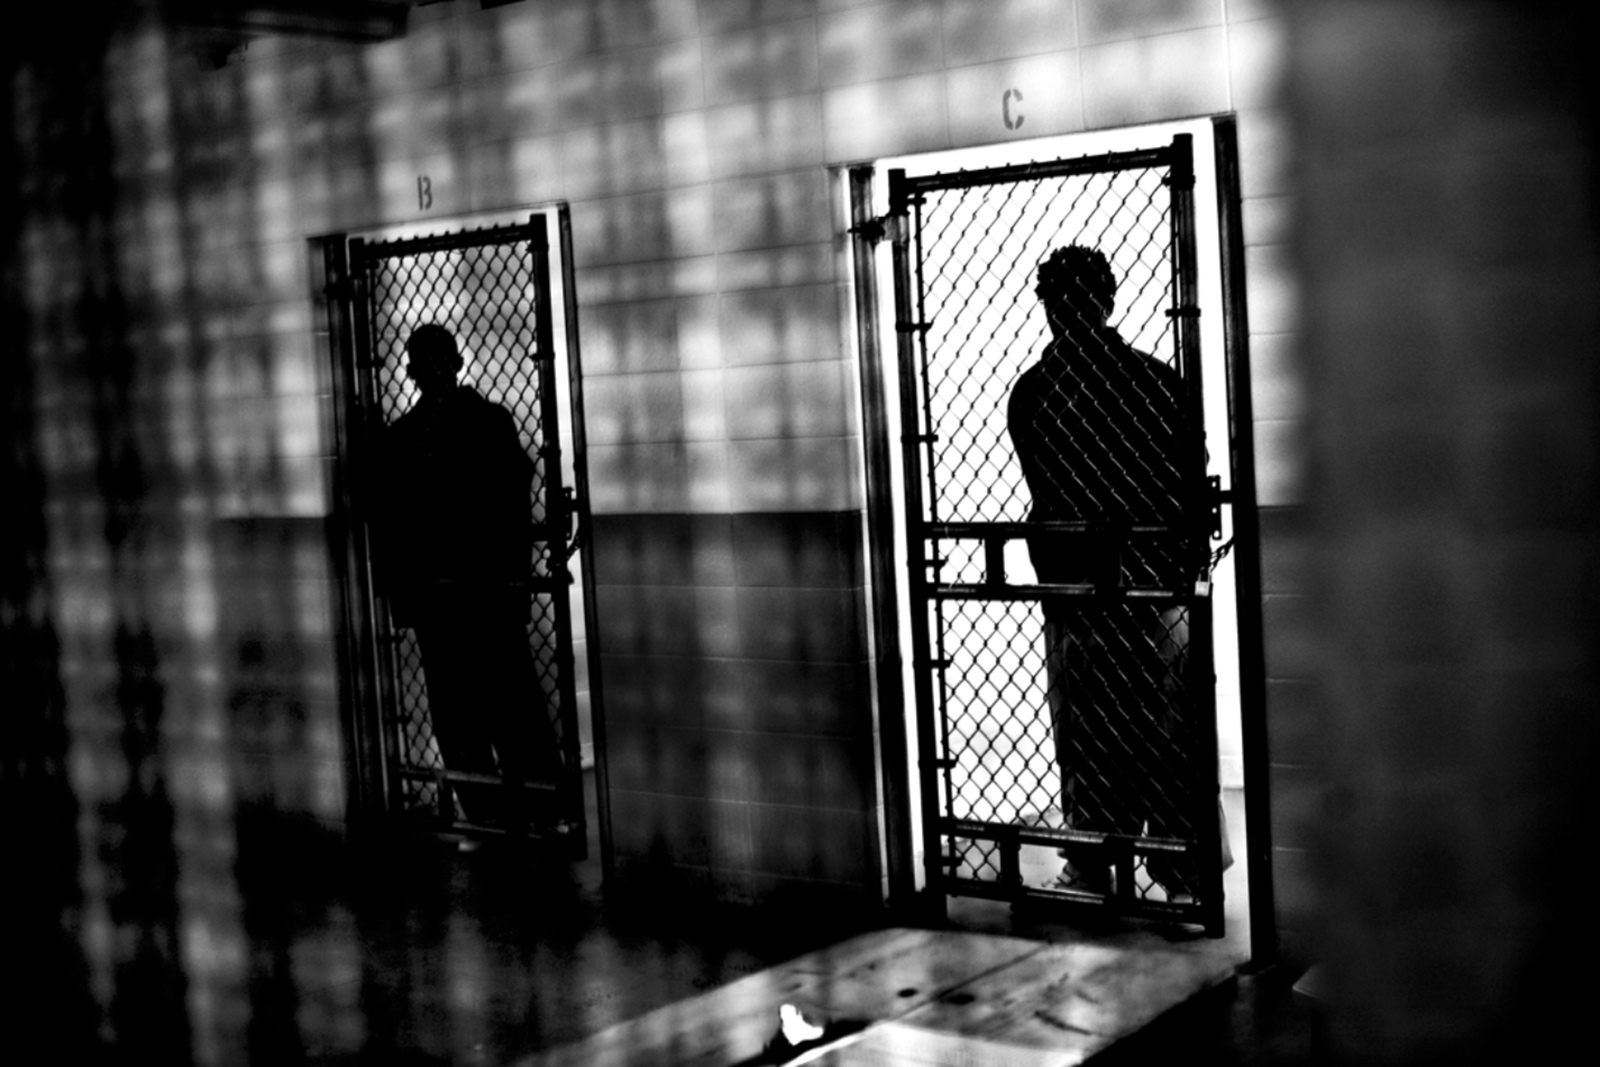 Teenagers held in confinement cells at a state juvenile detention center, St. Charles, Illinois, 2009